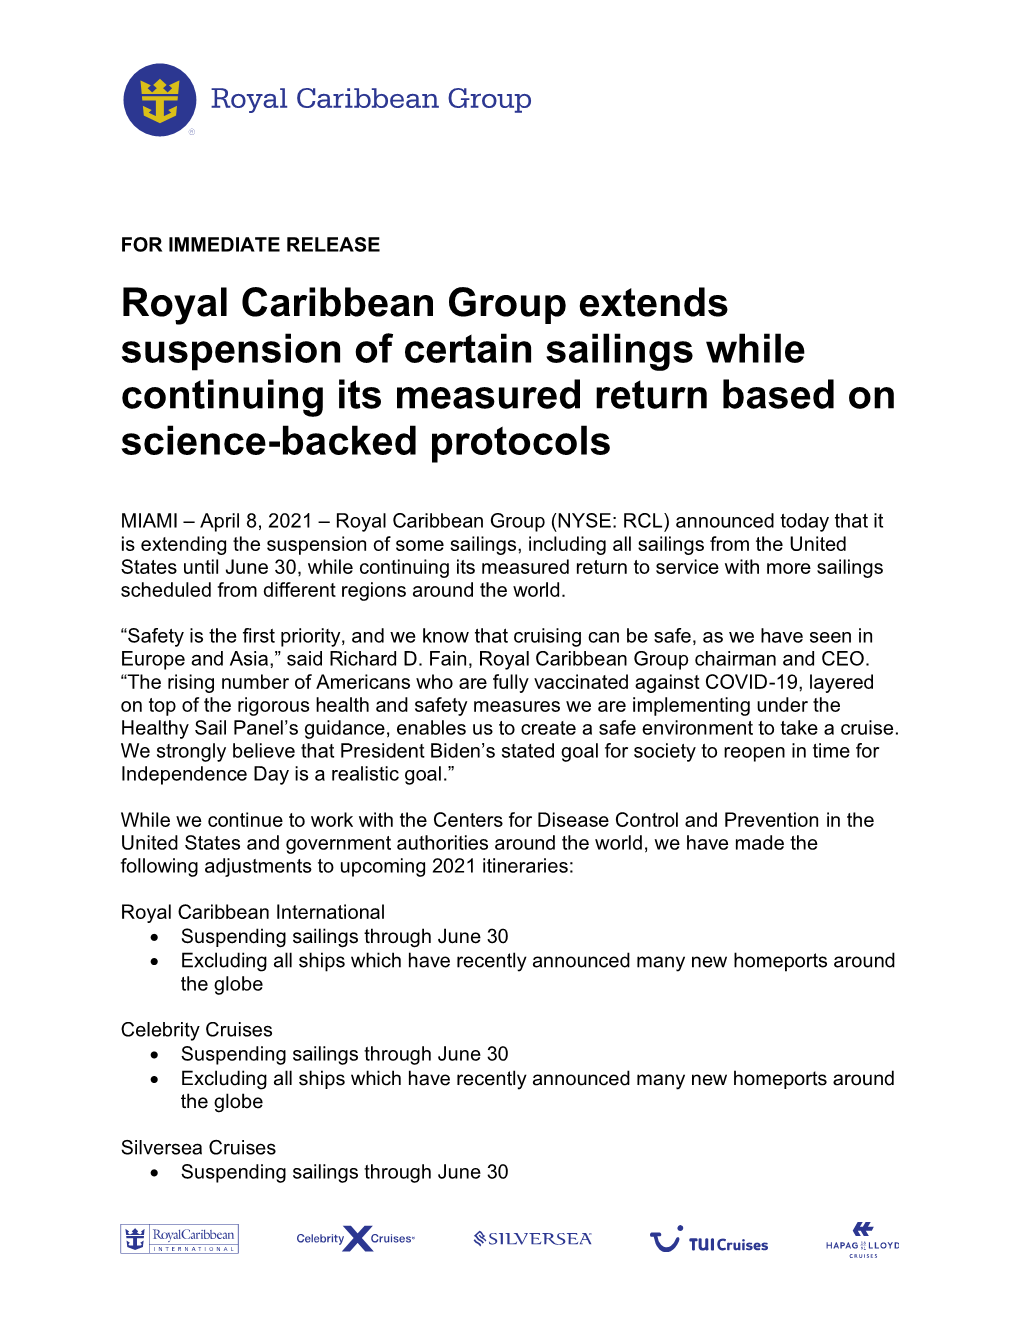 Royal Caribbean Group Extends Suspension of Certain Sailings While Continuing Its Measured Return Based on Science-Backed Protocols